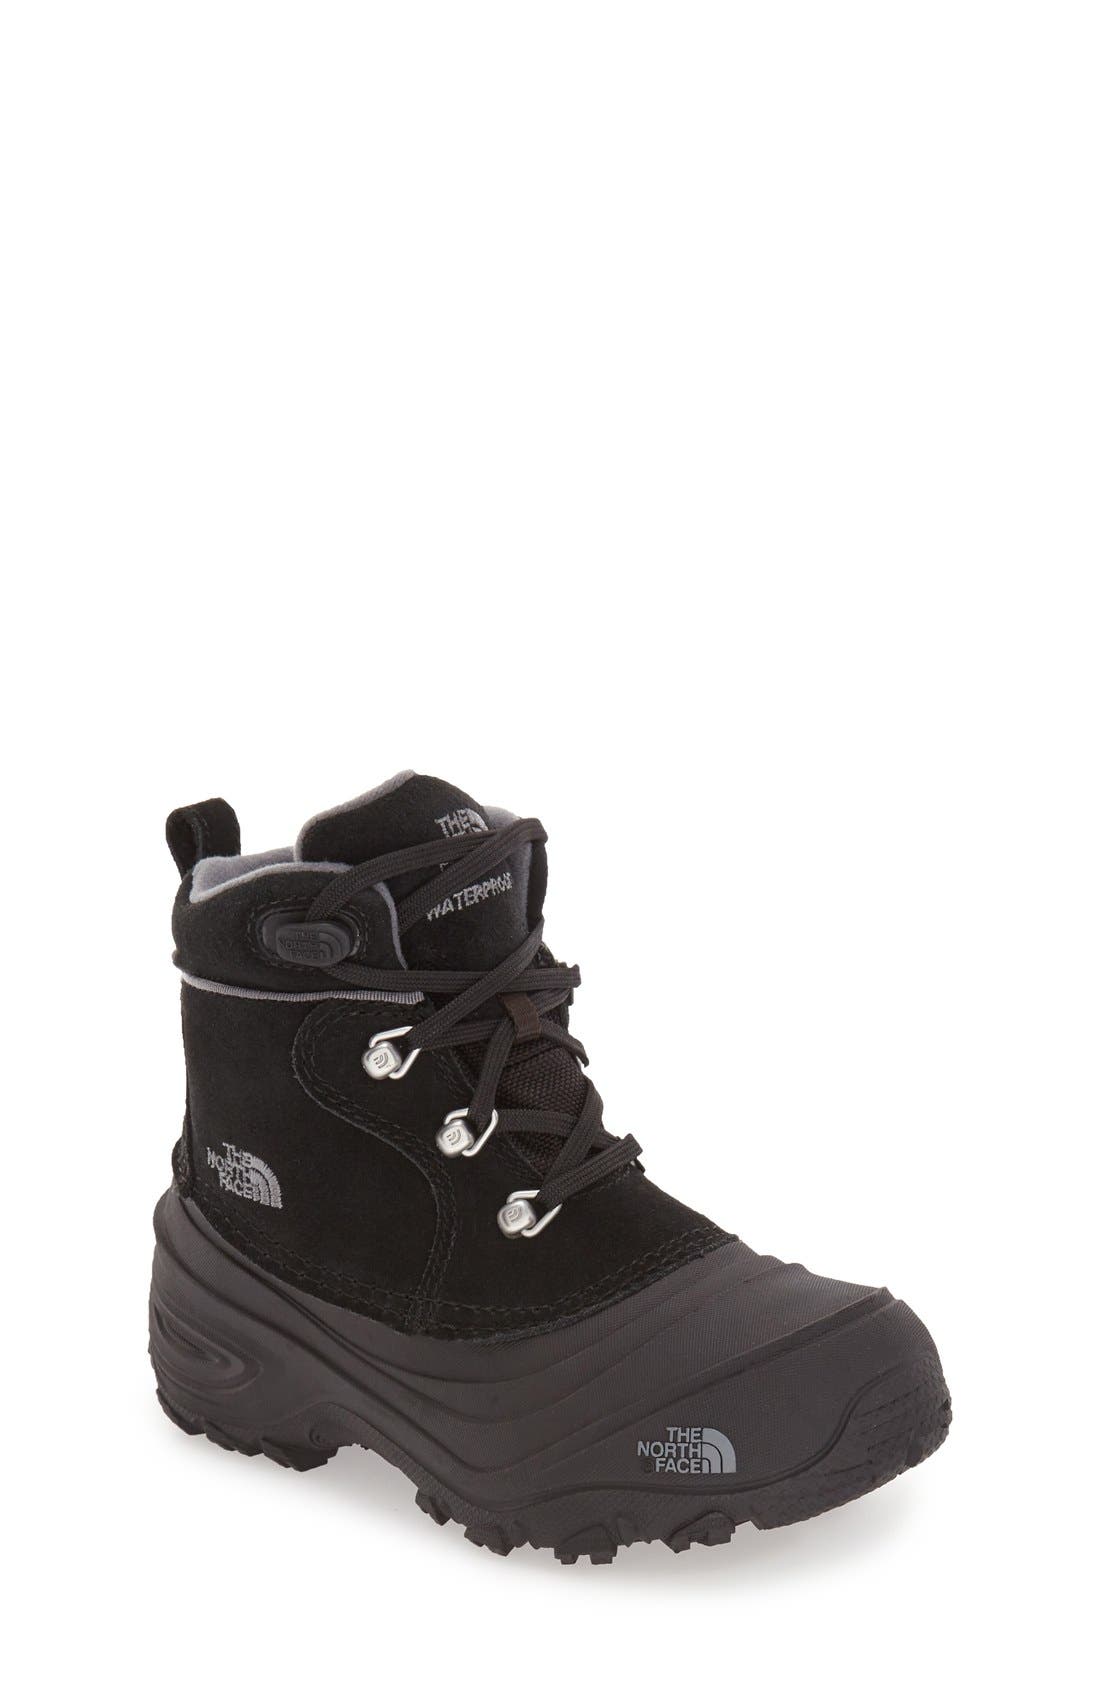 North Face Infant Bootie Size Chart